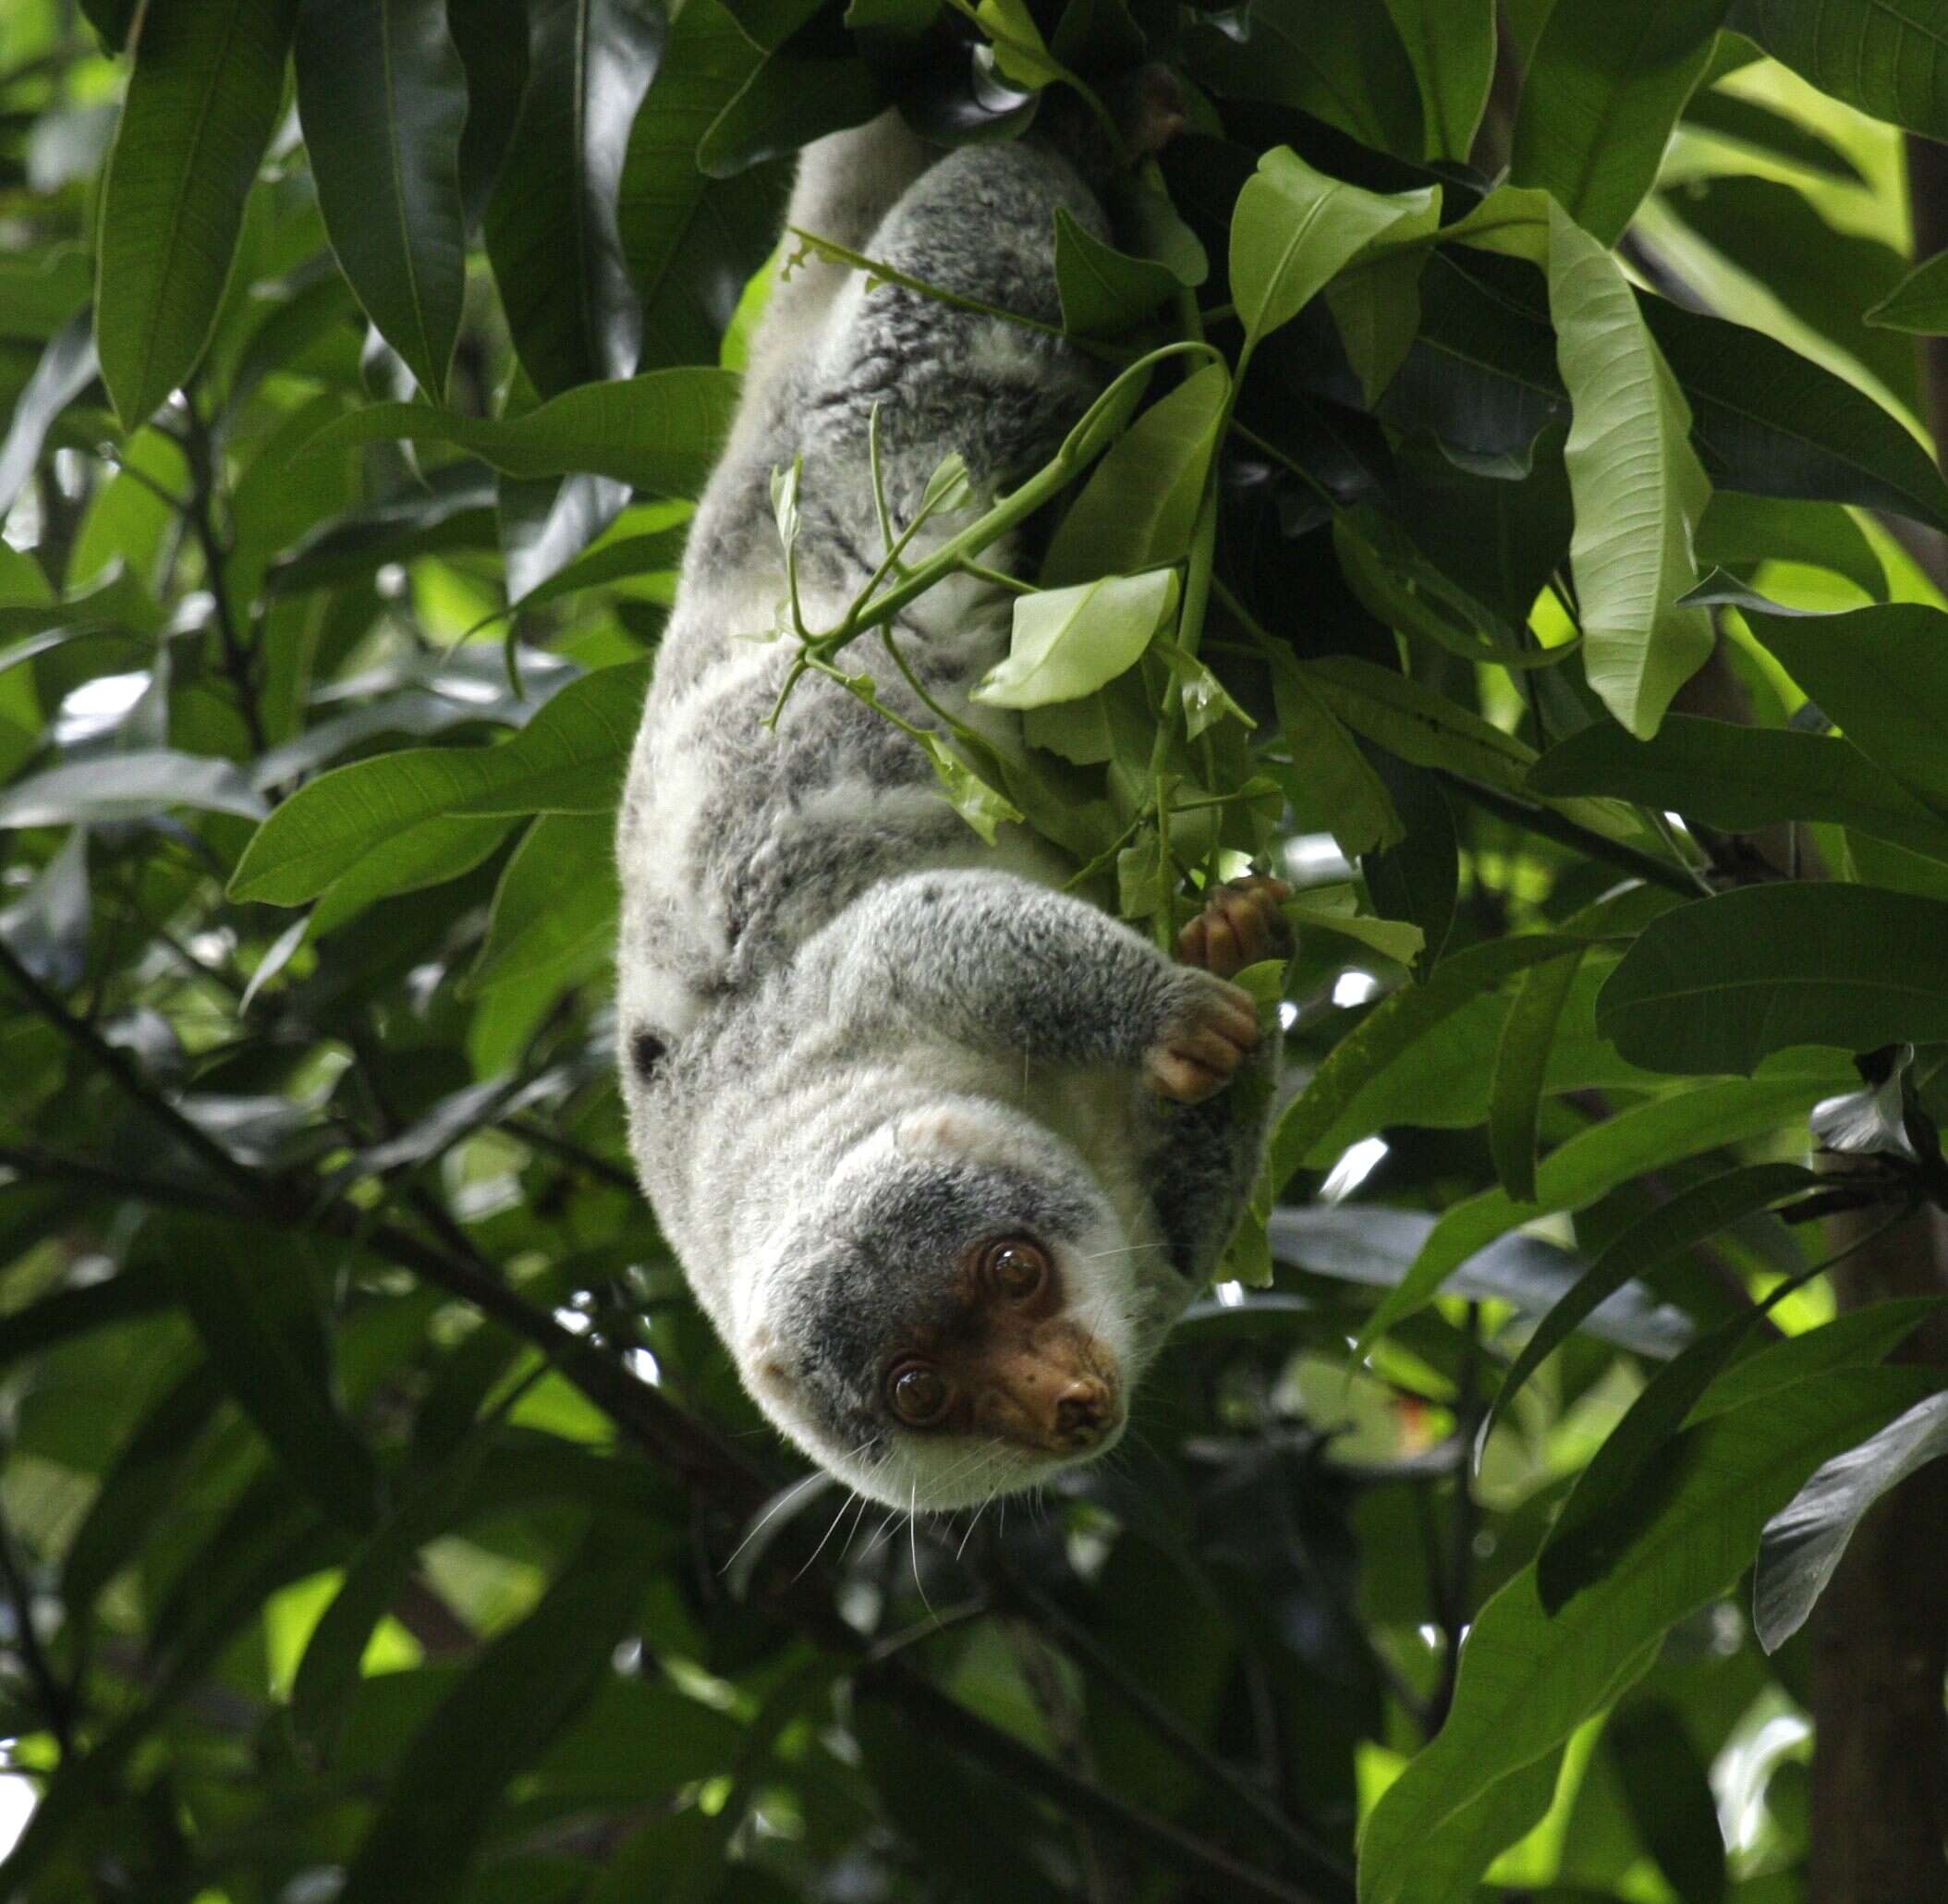 Image of brushtail possums and cuscuses